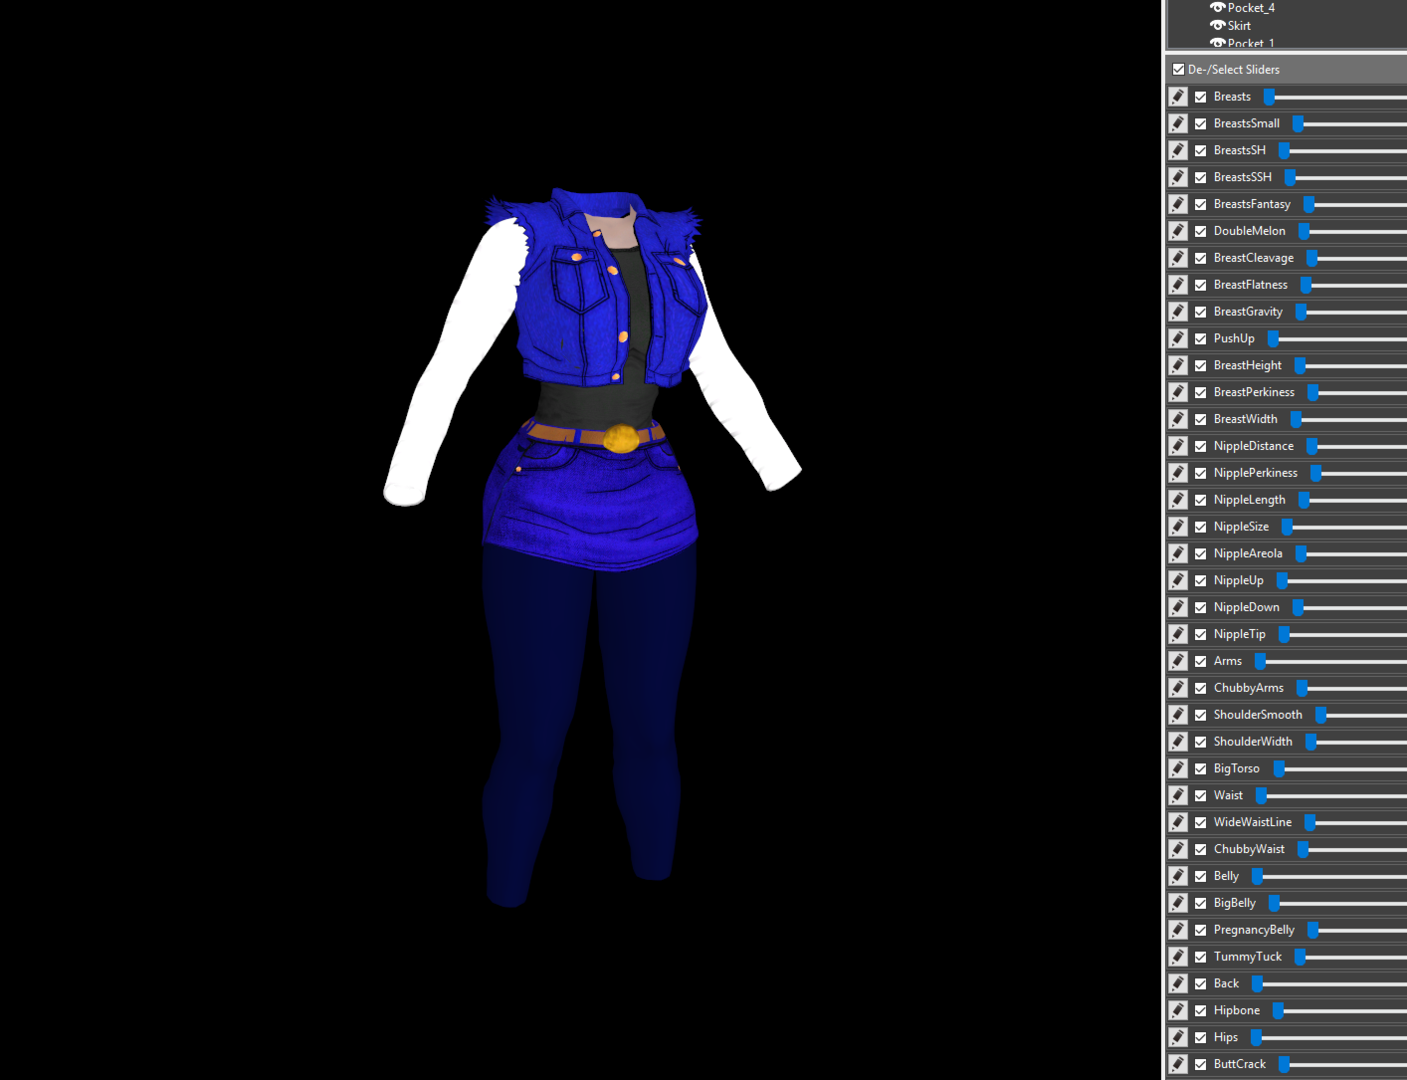 1654296974_2020-01-0802_36_12-OutfitStudio-Android18Jacket.thumb.png.e5f5478305ef6de68a73f660702f0ed7.png